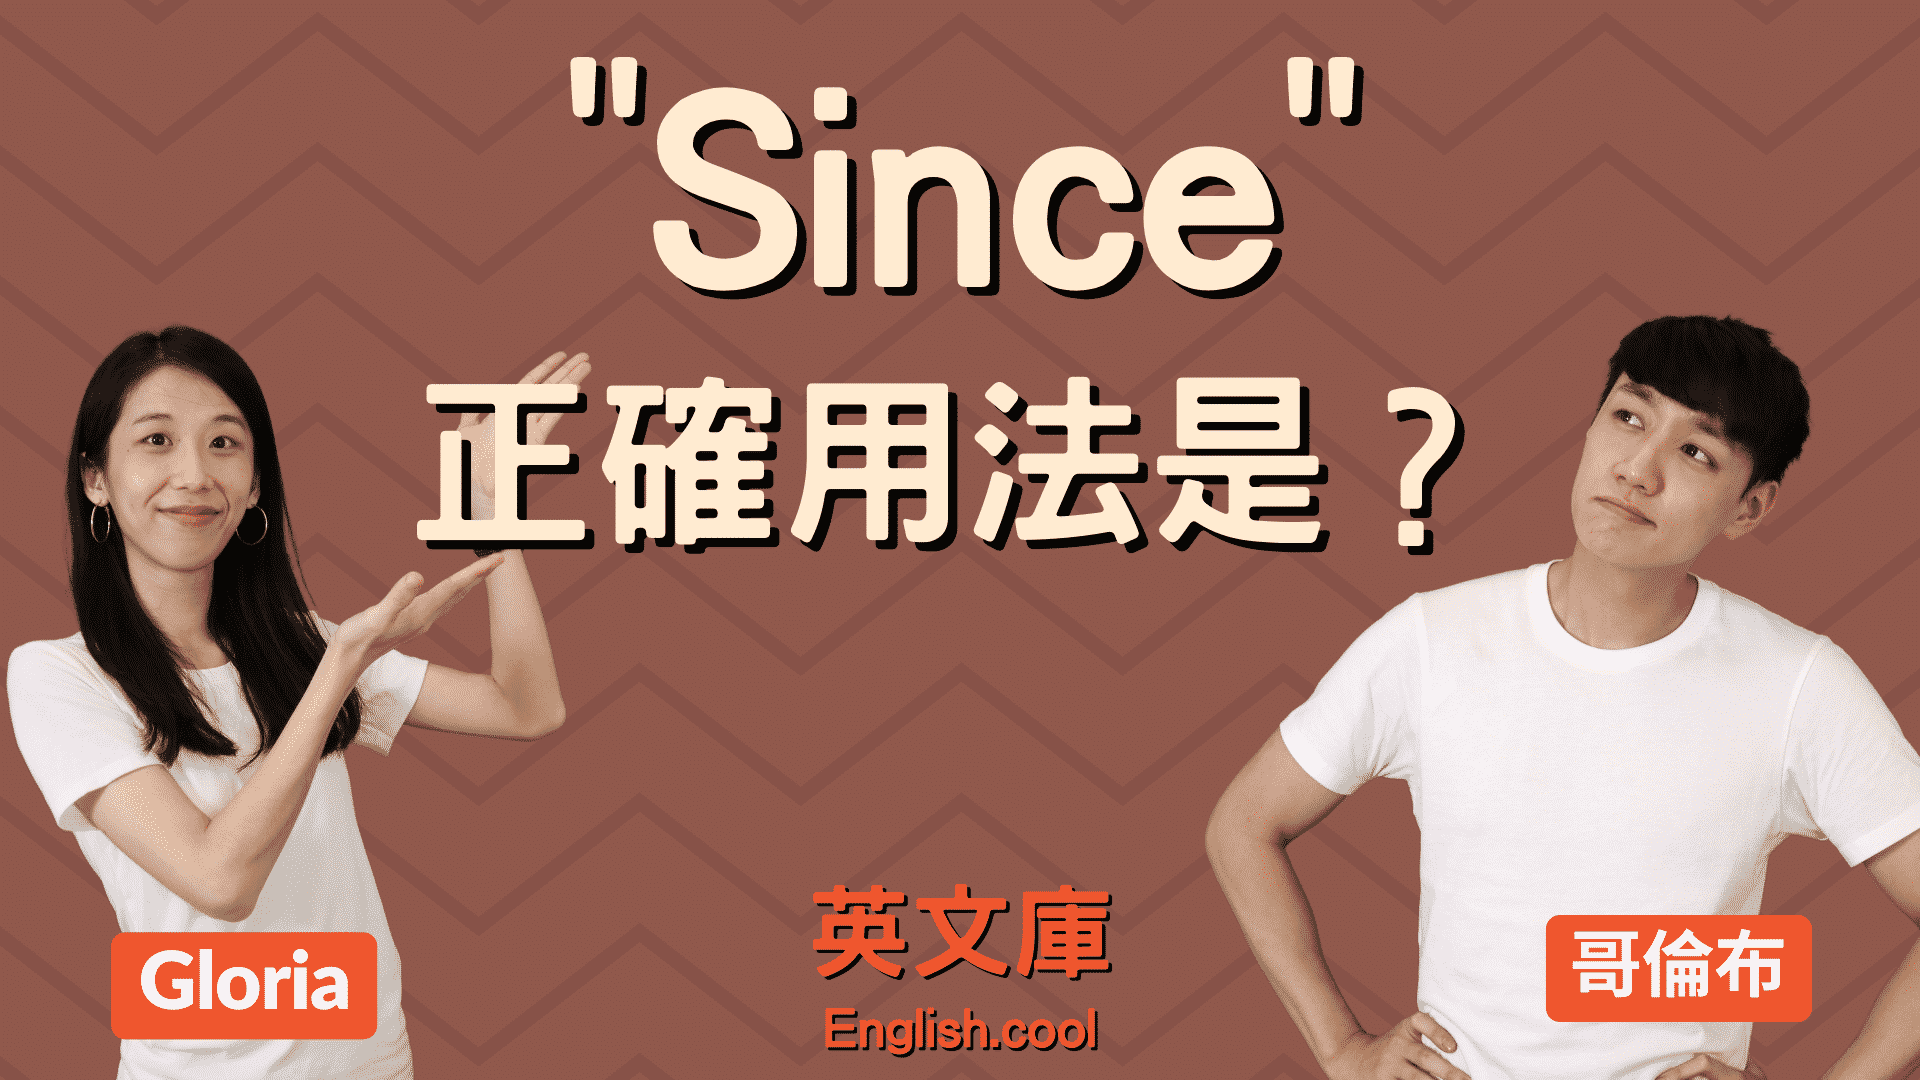 You are currently viewing 「since」正確用法是？ since 的6個用法！（含英文例句）